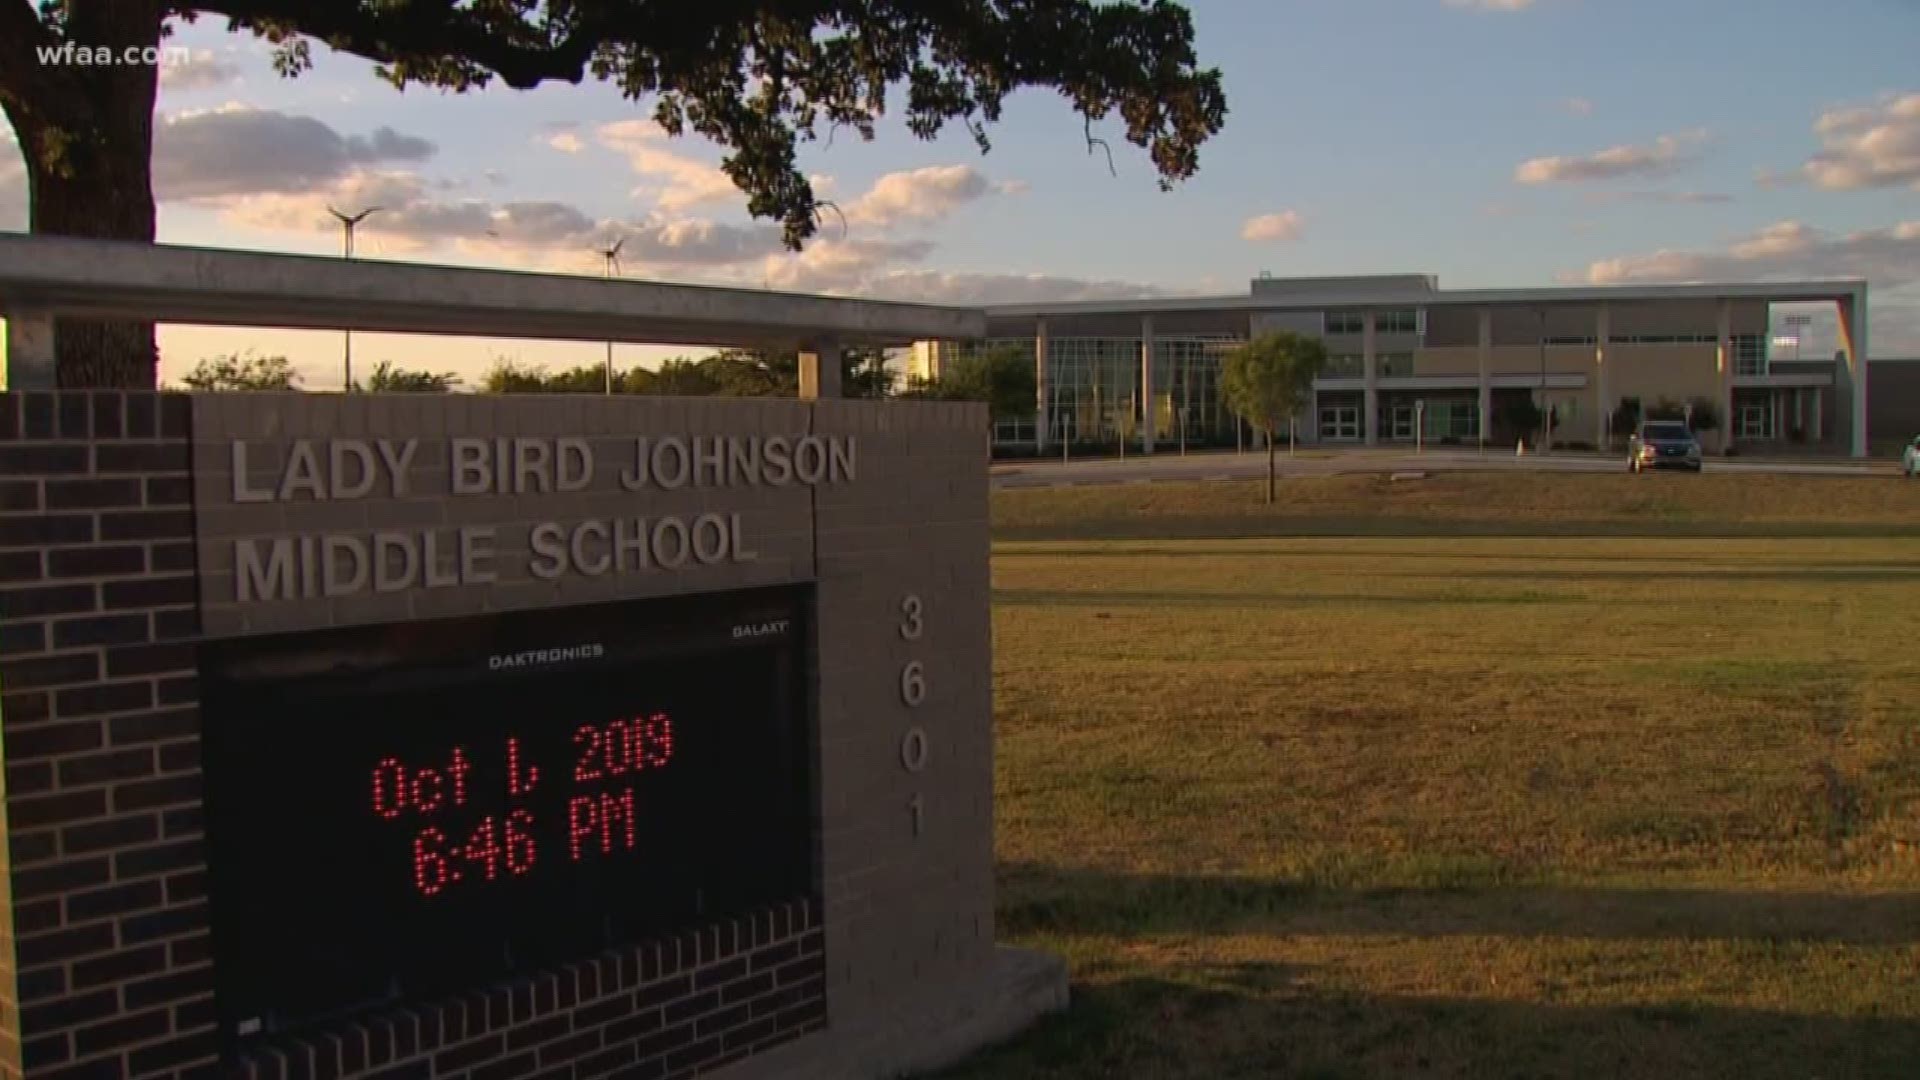 Three Irving middle school students are facing serious charges after they allegedly recorded and shared video of an autistic student in a school bathroom.